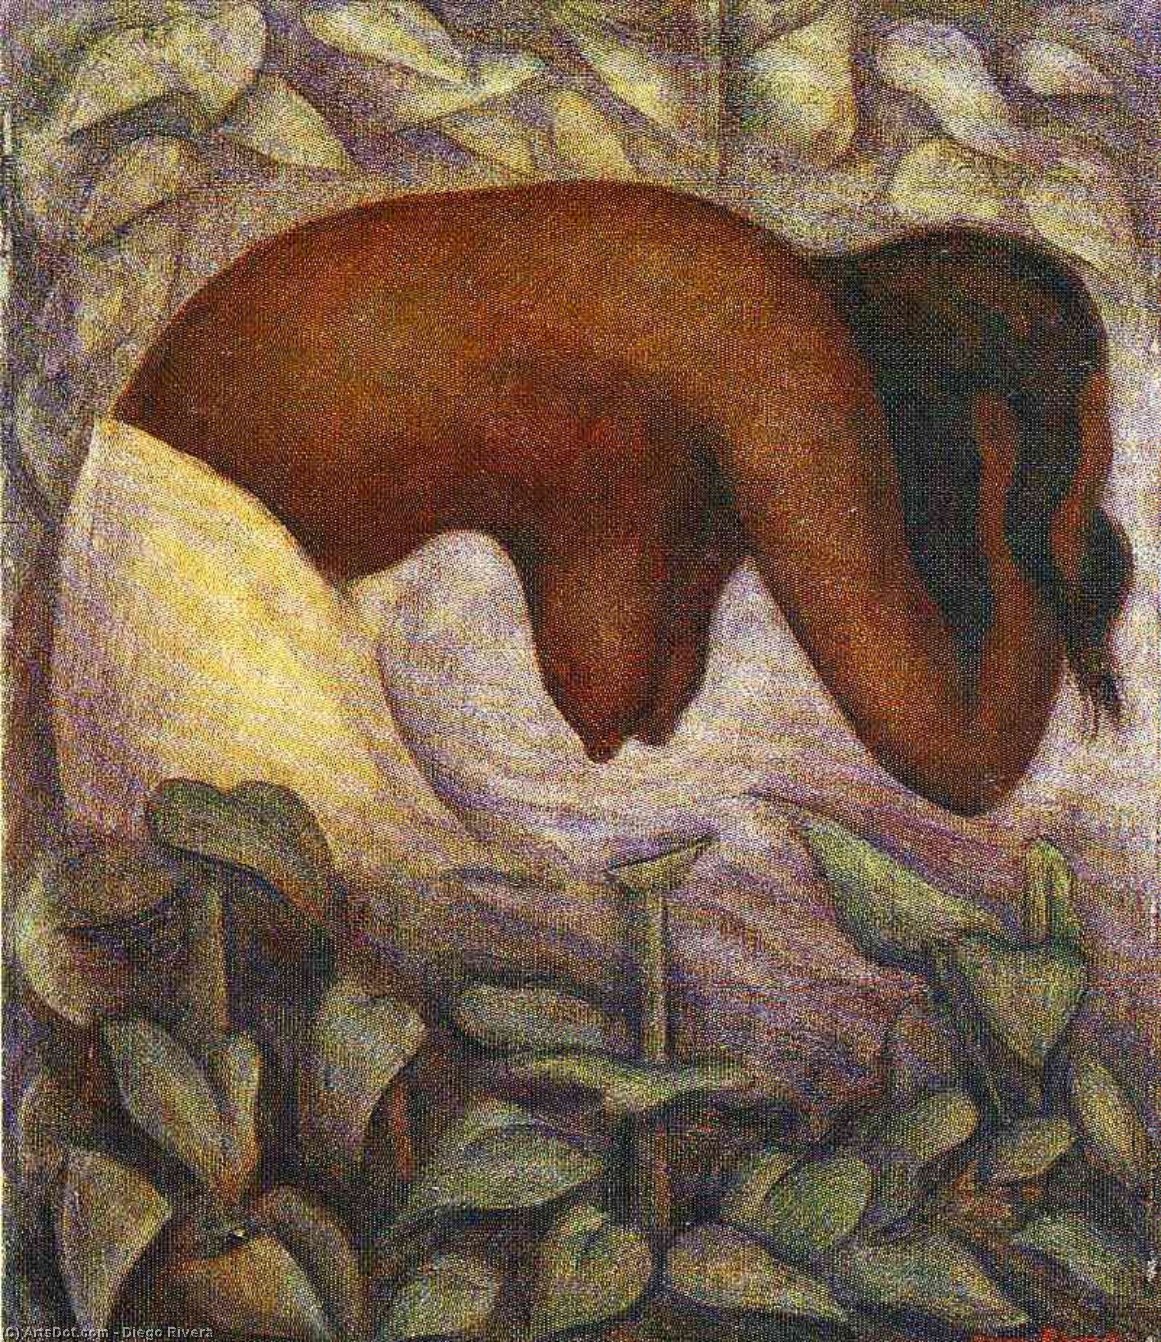 Buy Museum Art Reproductions Bather of Tehuantepec, 1923 by Diego Rivera (Inspired By) (1886-1957, Mexico) | ArtsDot.com